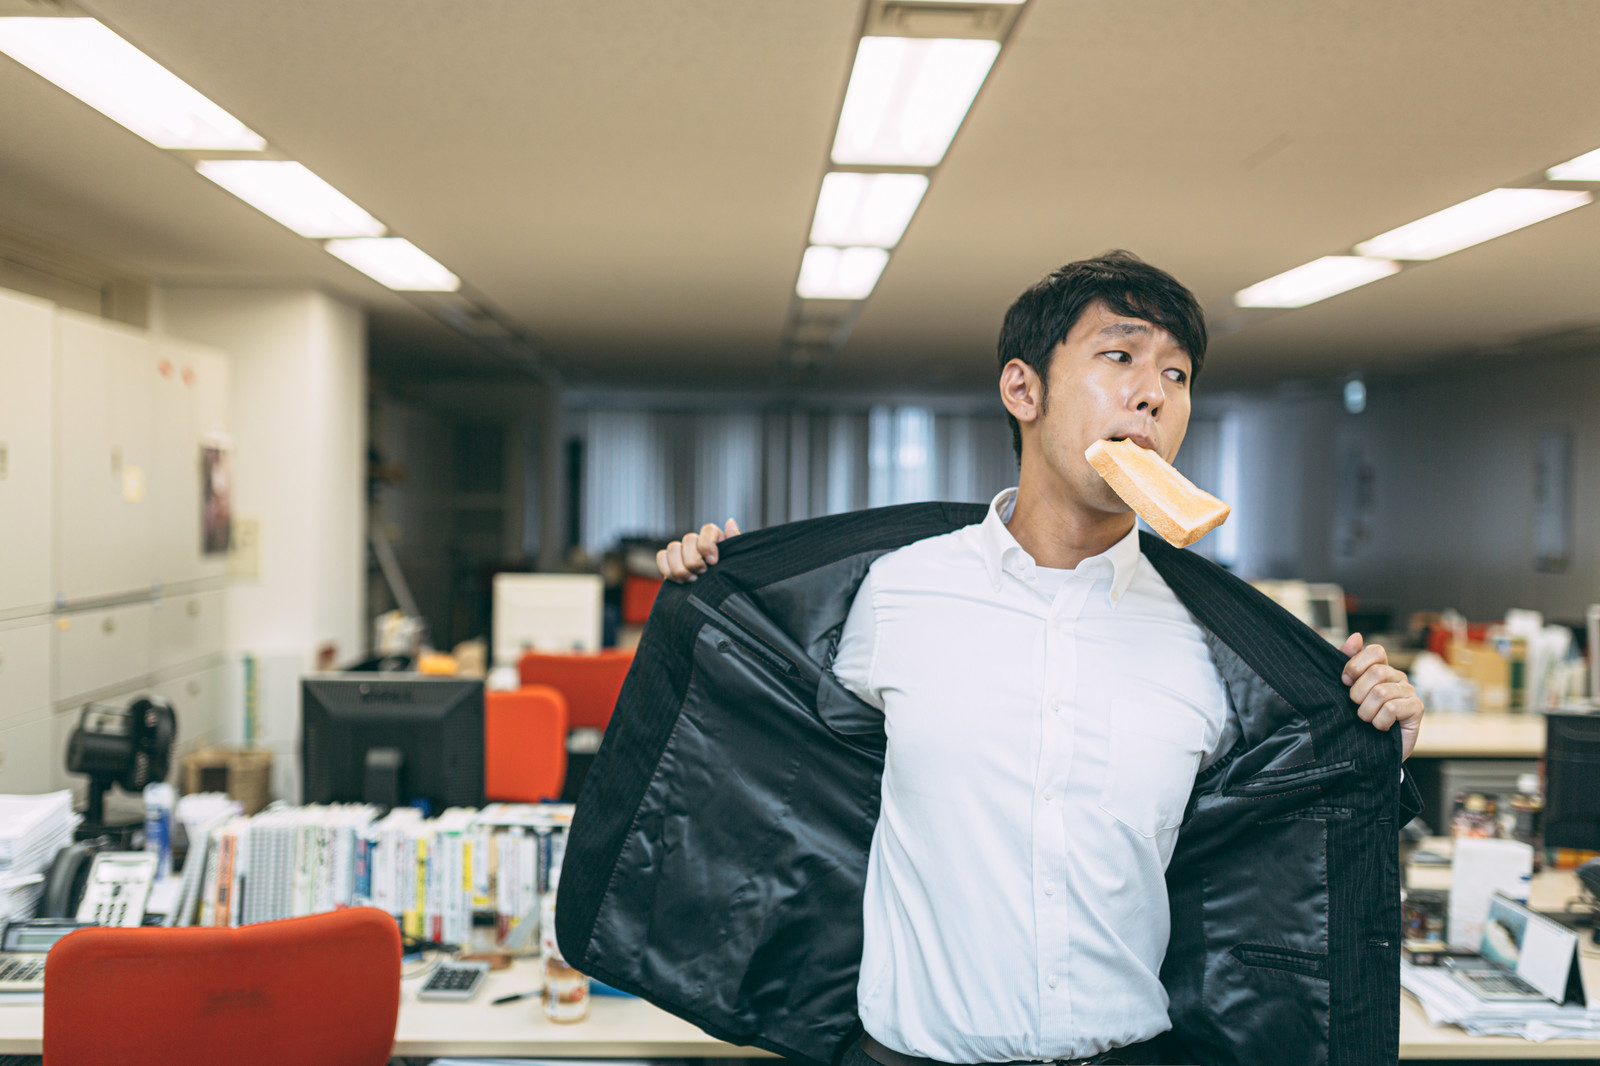 Japanese business wear brand creates helpful graph to tell you what to wear at work